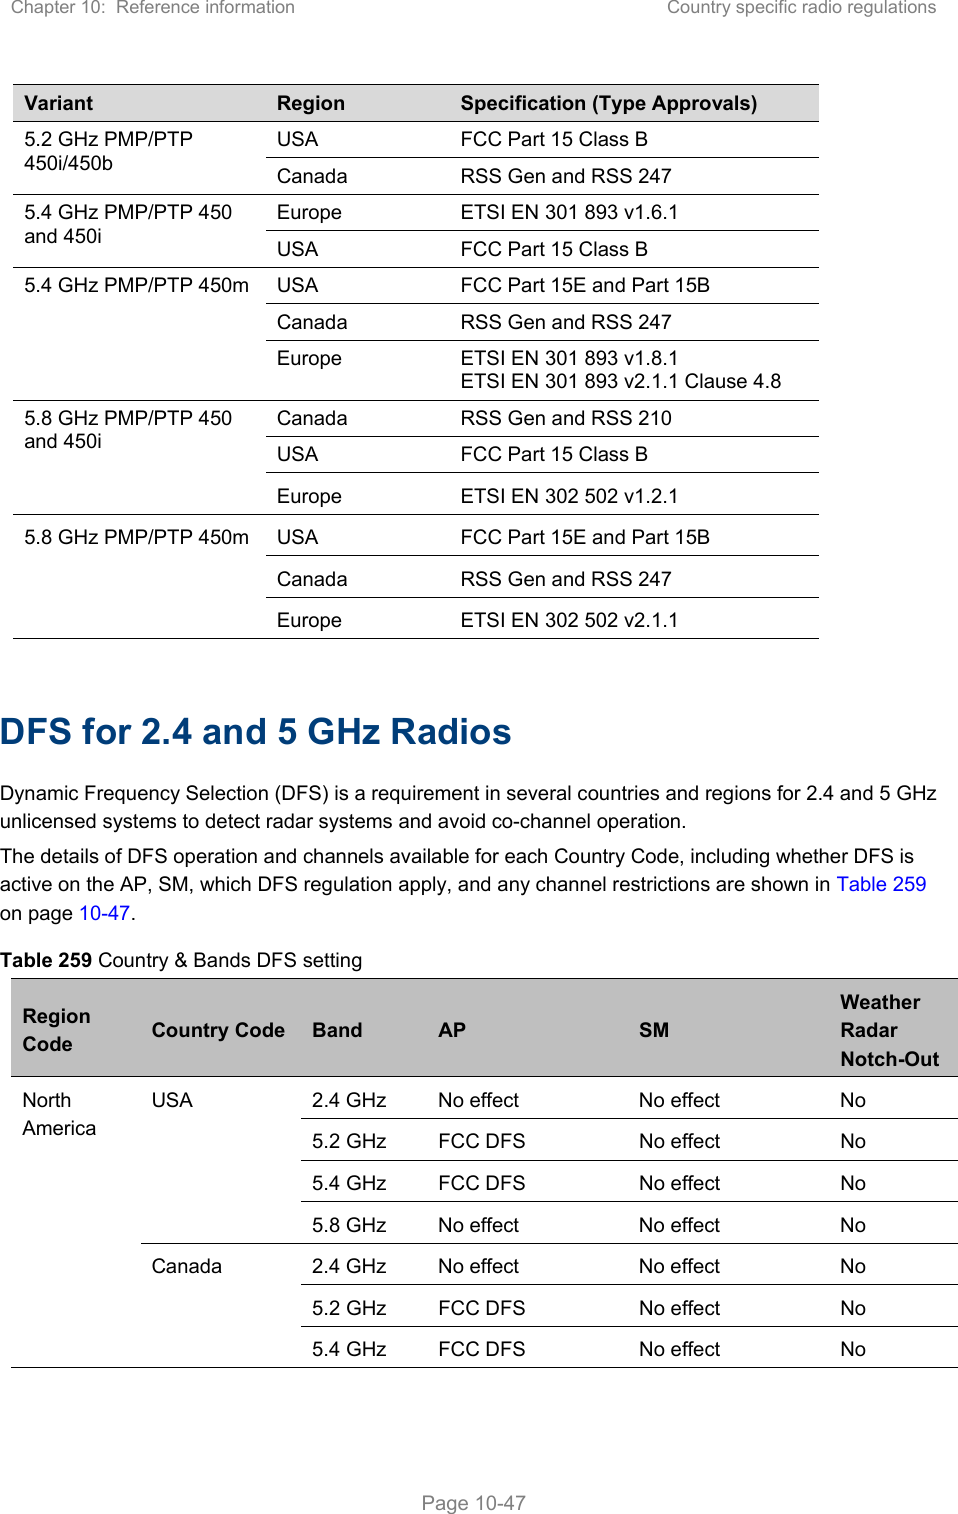 Chapter 10:  Reference information  Country specific radio regulations   Page 10-47 Variant  Region  Specification (Type Approvals) 5.2 GHz PMP/PTP 450i/450b USA  FCC Part 15 Class B Canada  RSS Gen and RSS 247 5.4 GHz PMP/PTP 450 and 450i Europe  ETSI EN 301 893 v1.6.1 USA  FCC Part 15 Class B 5.4 GHz PMP/PTP 450m  USA  FCC Part 15E and Part 15B Canada  RSS Gen and RSS 247 Europe  ETSI EN 301 893 v1.8.1 ETSI EN 301 893 v2.1.1 Clause 4.8 5.8 GHz PMP/PTP 450 and 450i Canada  RSS Gen and RSS 210 USA  FCC Part 15 Class B Europe  ETSI EN 302 502 v1.2.1 5.8 GHz PMP/PTP 450m  USA  FCC Part 15E and Part 15B Canada  RSS Gen and RSS 247 Europe  ETSI EN 302 502 v2.1.1  DFS for 2.4 and 5 GHz Radios Dynamic Frequency Selection (DFS) is a requirement in several countries and regions for 2.4 and 5 GHz unlicensed systems to detect radar systems and avoid co-channel operation. The details of DFS operation and channels available for each Country Code, including whether DFS is active on the AP, SM, which DFS regulation apply, and any channel restrictions are shown in Table 259 on page 10-47. Table 259 Country &amp; Bands DFS setting Region Code  Country Code  Band  AP  SM Weather Radar Notch-Out North America USA  2.4 GHz  No effect  No effect  No 5.2 GHz  FCC DFS  No effect  No 5.4 GHz  FCC DFS  No effect  No 5.8 GHz  No effect  No effect  No Canada  2.4 GHz  No effect  No effect  No 5.2 GHz  FCC DFS  No effect  No 5.4 GHz  FCC DFS  No effect  No 